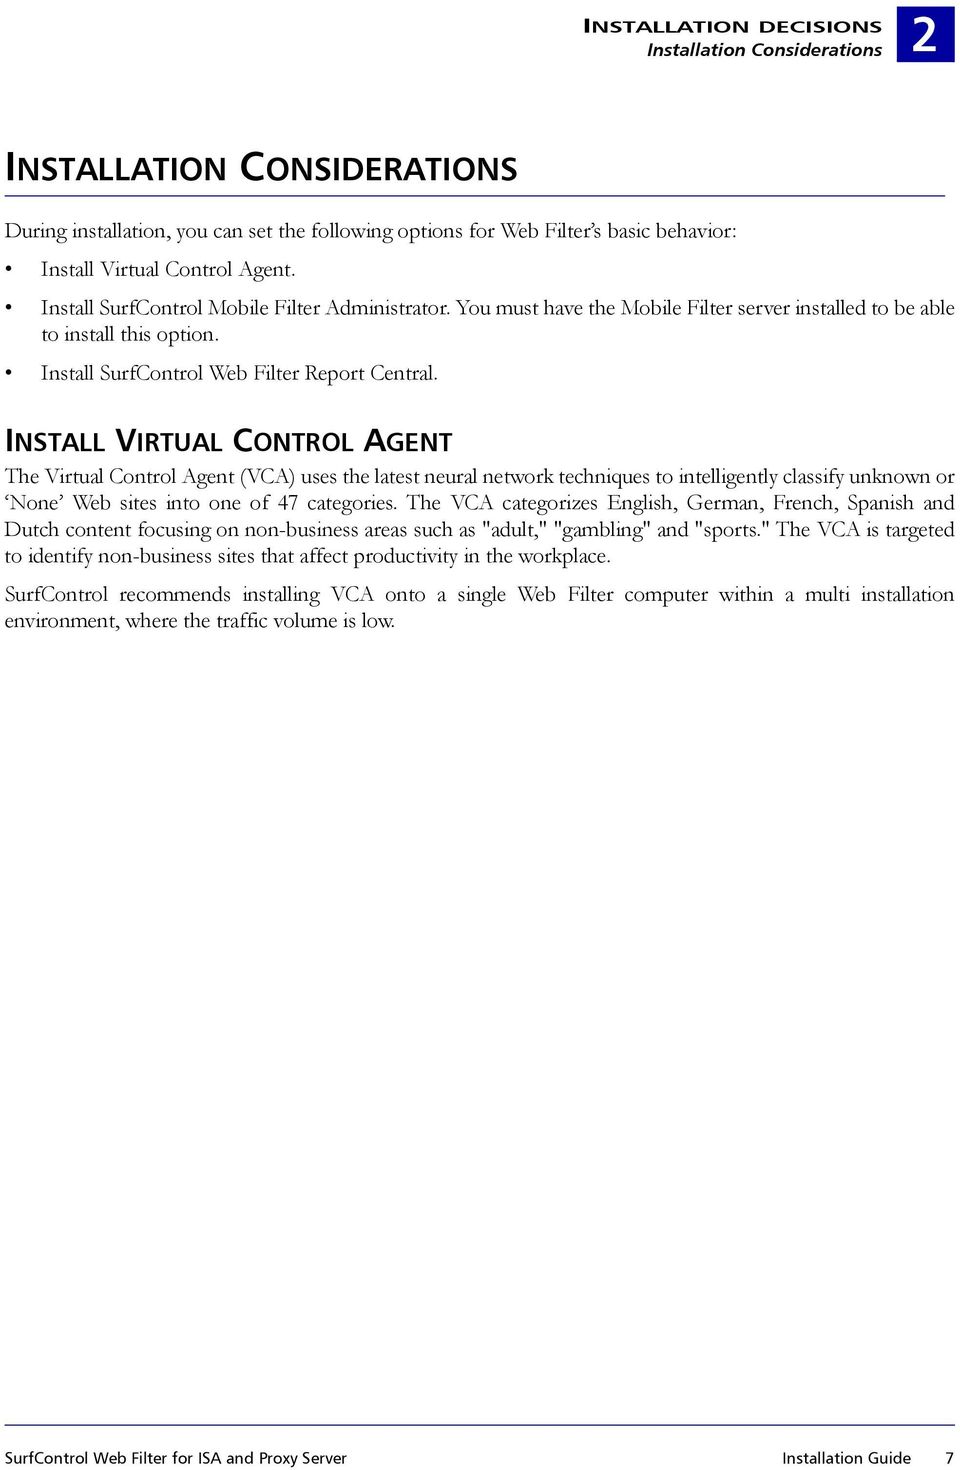 INSTALL VIRTUAL CONTROL AGENT The Virtual Control Agent (VCA) uses the latest neural network techniques to intelligently classify unknown or None Web sites into one of 47 categories.